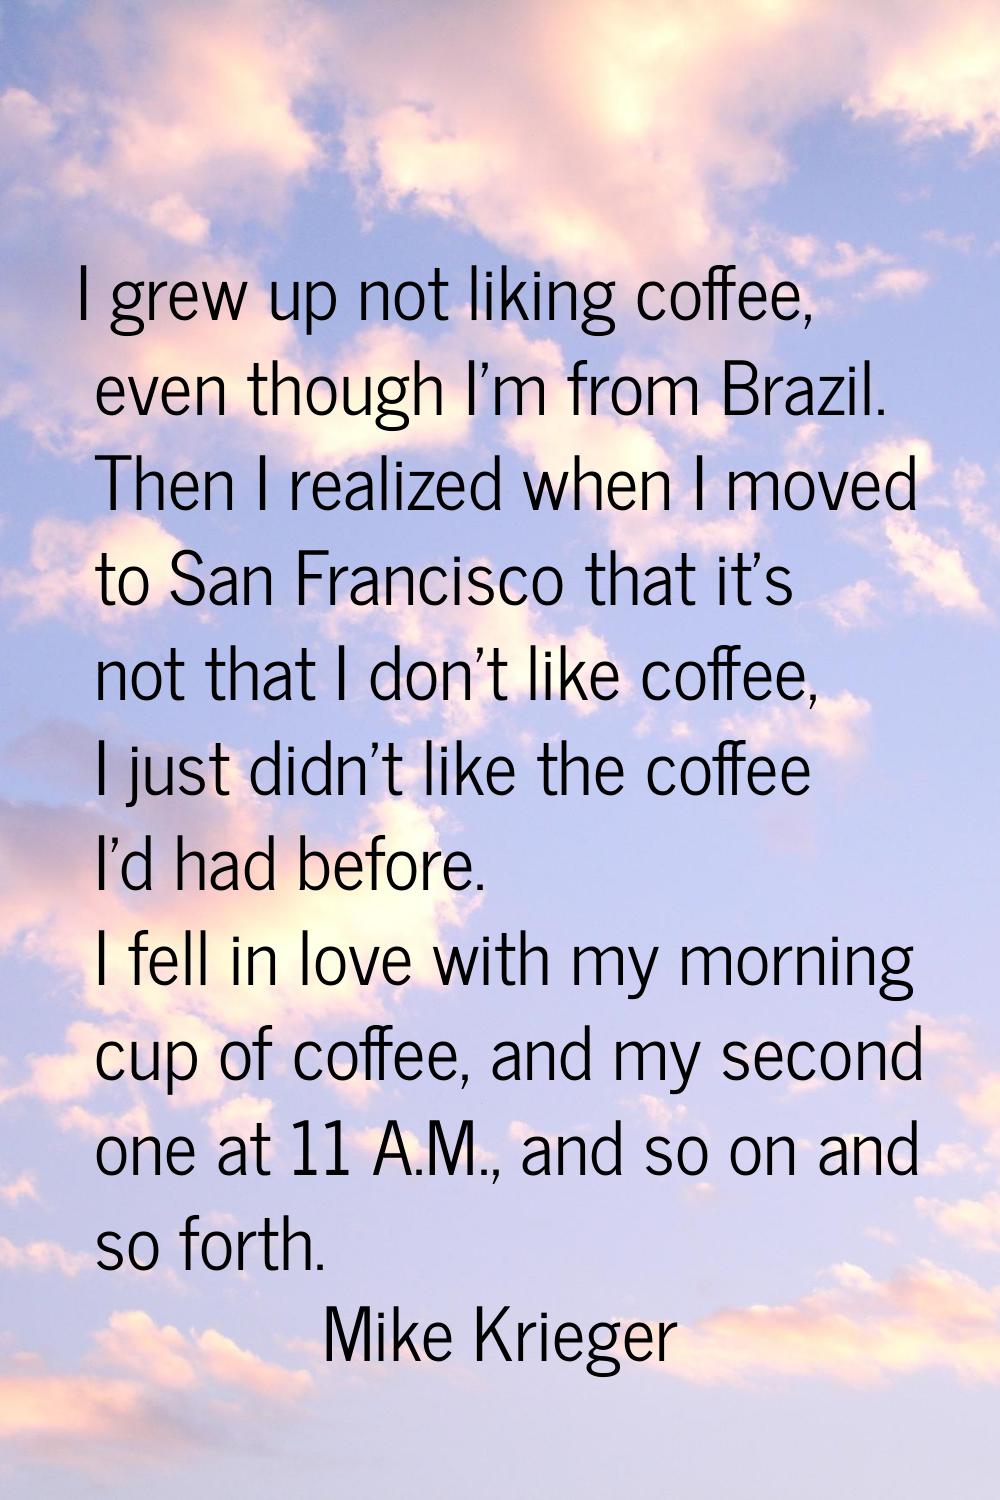 I grew up not liking coffee, even though I'm from Brazil. Then I realized when I moved to San Franc